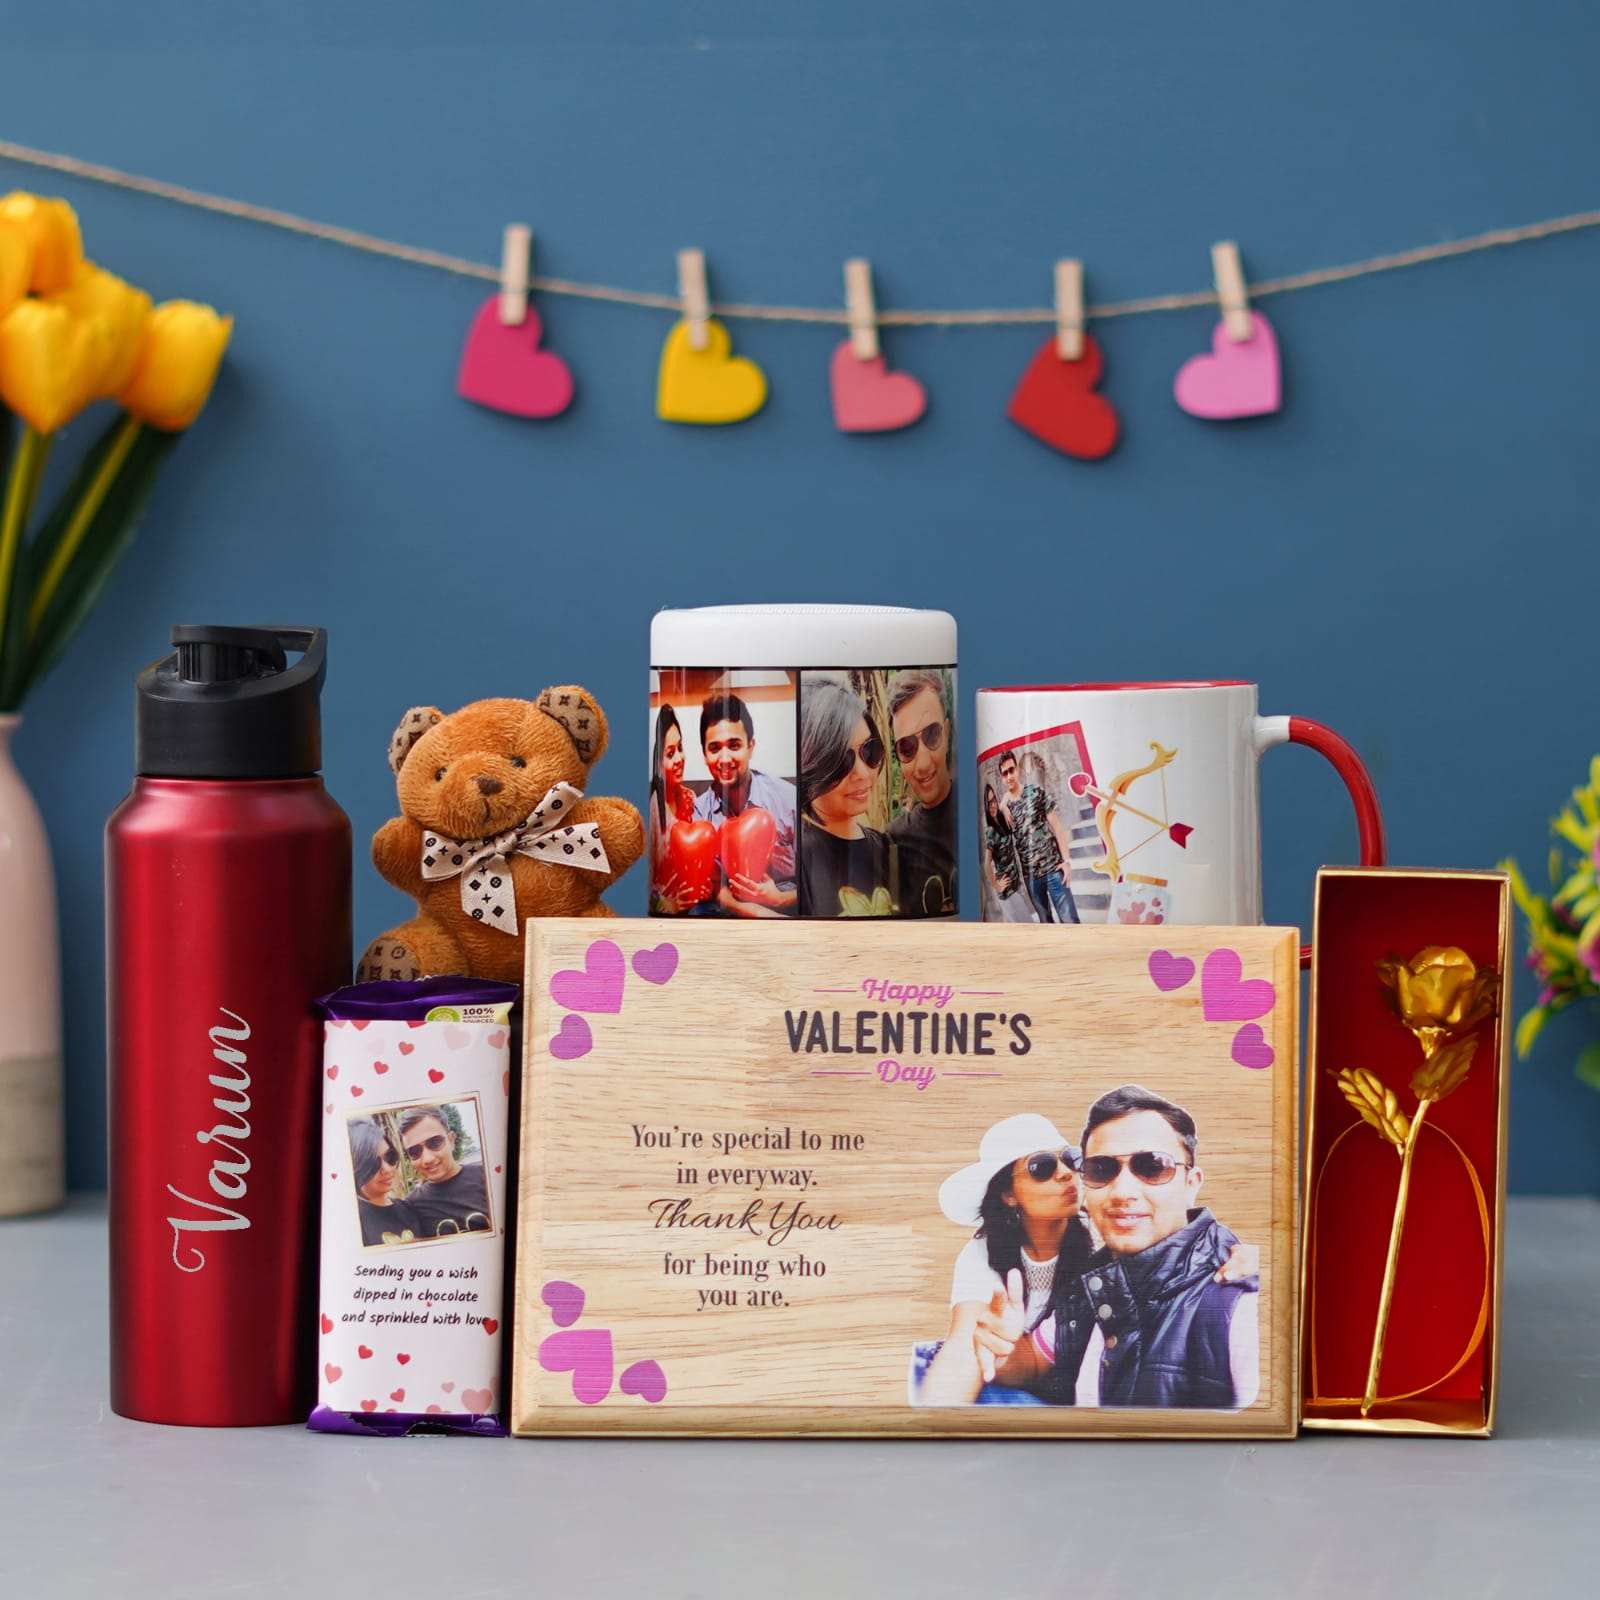 MANTOUSS Valentines Day Gift for Girlfriend/Boyfriend/Husband/Wife/Fiance-Beautiful  Basket+Chocolates +3pc Roses and Teddy Bear in Heart Box+Message  Bottle+Heart Shaped Candle+Card, 900 gram : Amazon.in: Grocery & Gourmet  Foods